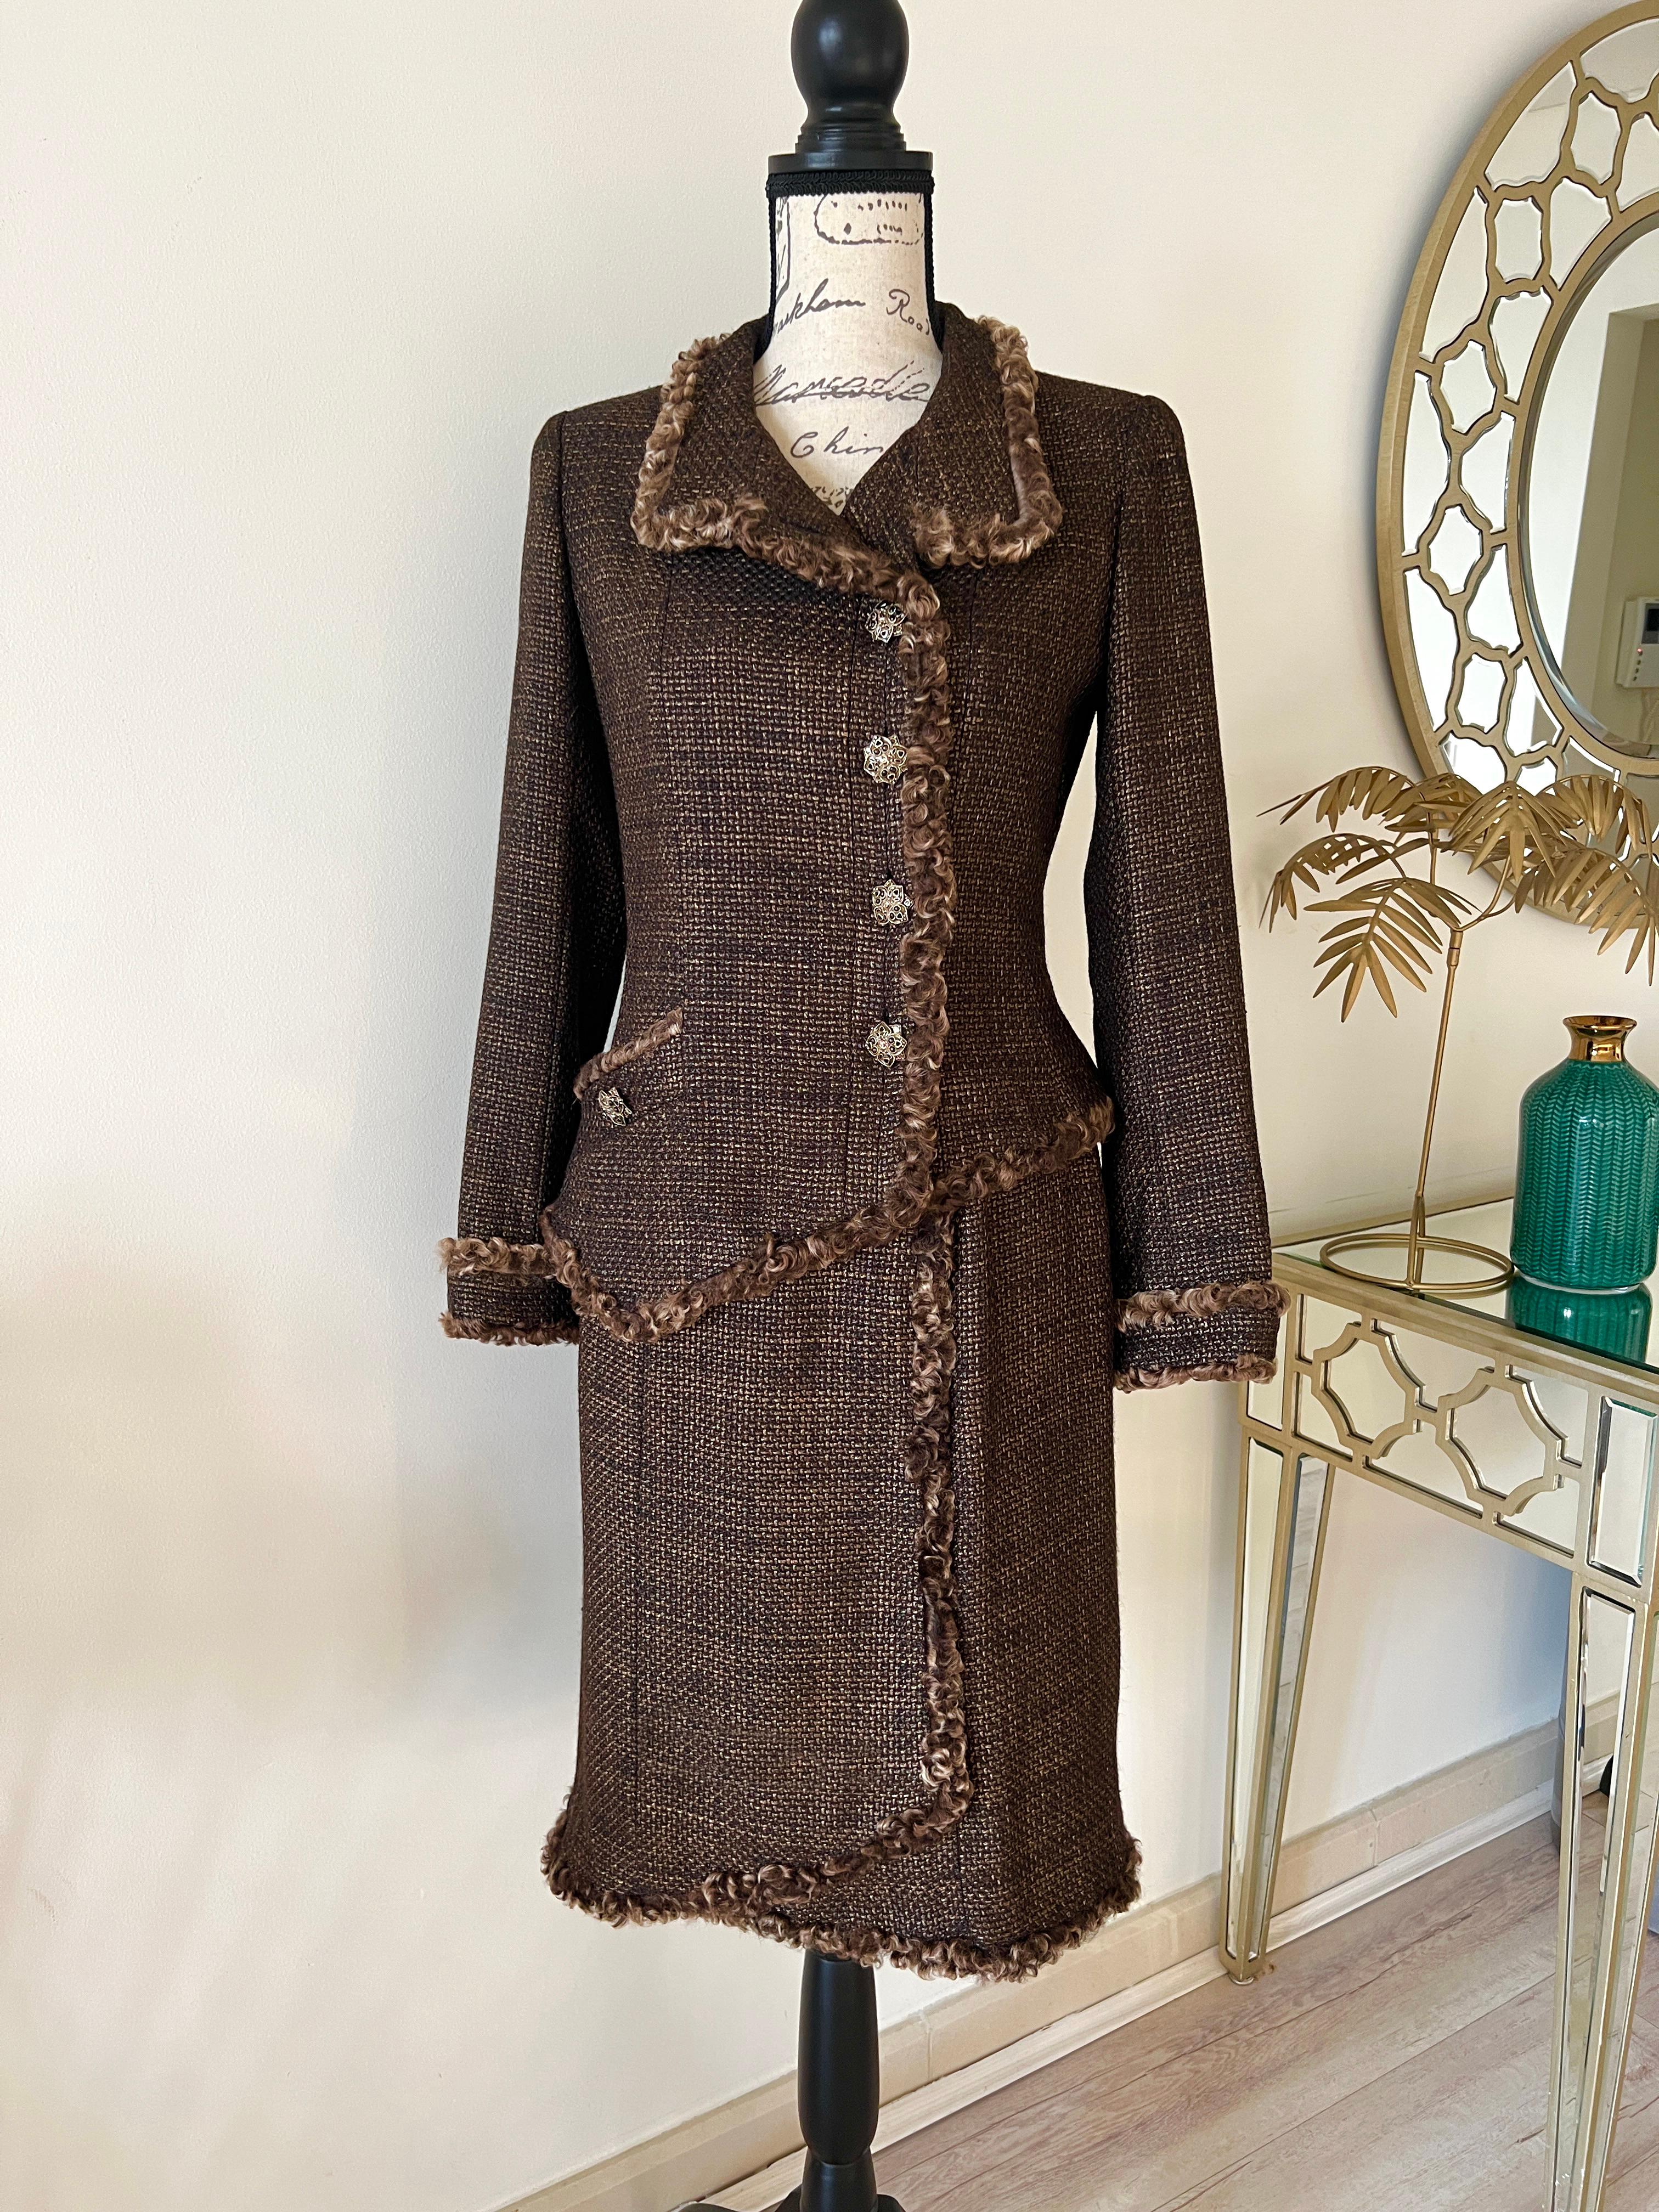 Chanel Extremely Rare Jewel Buttons Tweed Suit For Sale 10